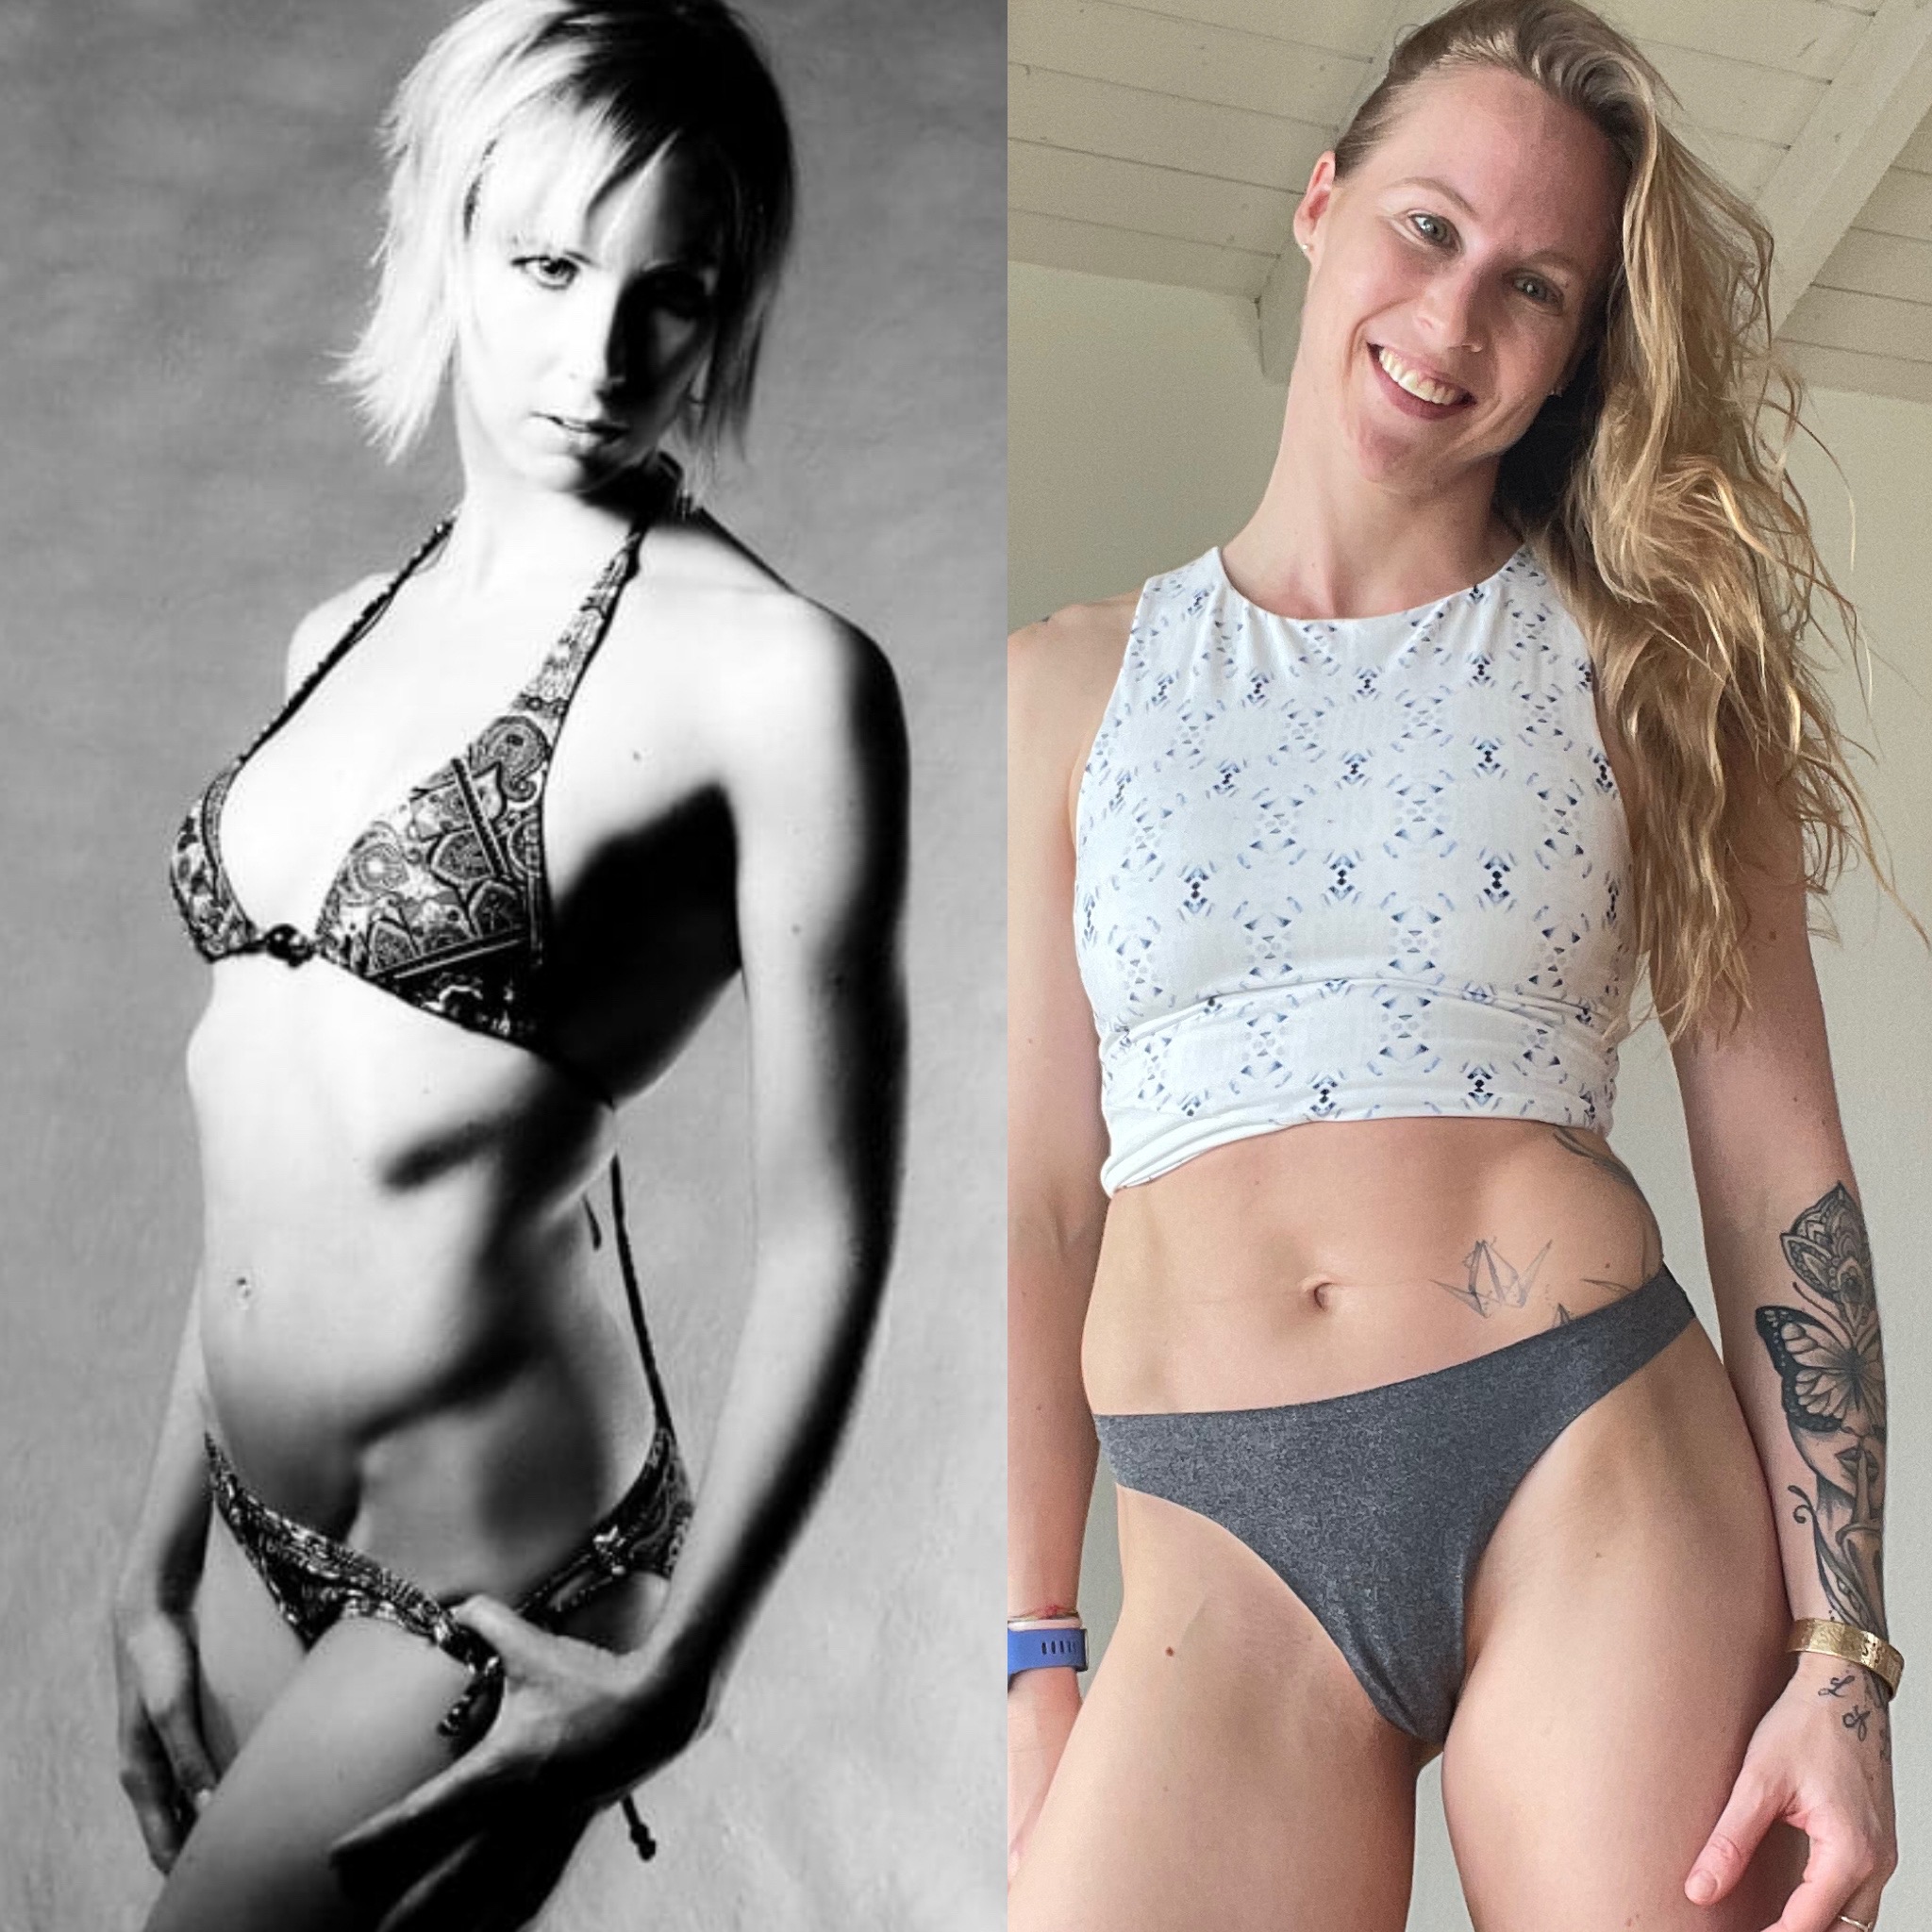 Rhyanna Watson Nude - I Swear, You Will Fly: The Before & After Photos I Want to Share. |  elephant journal